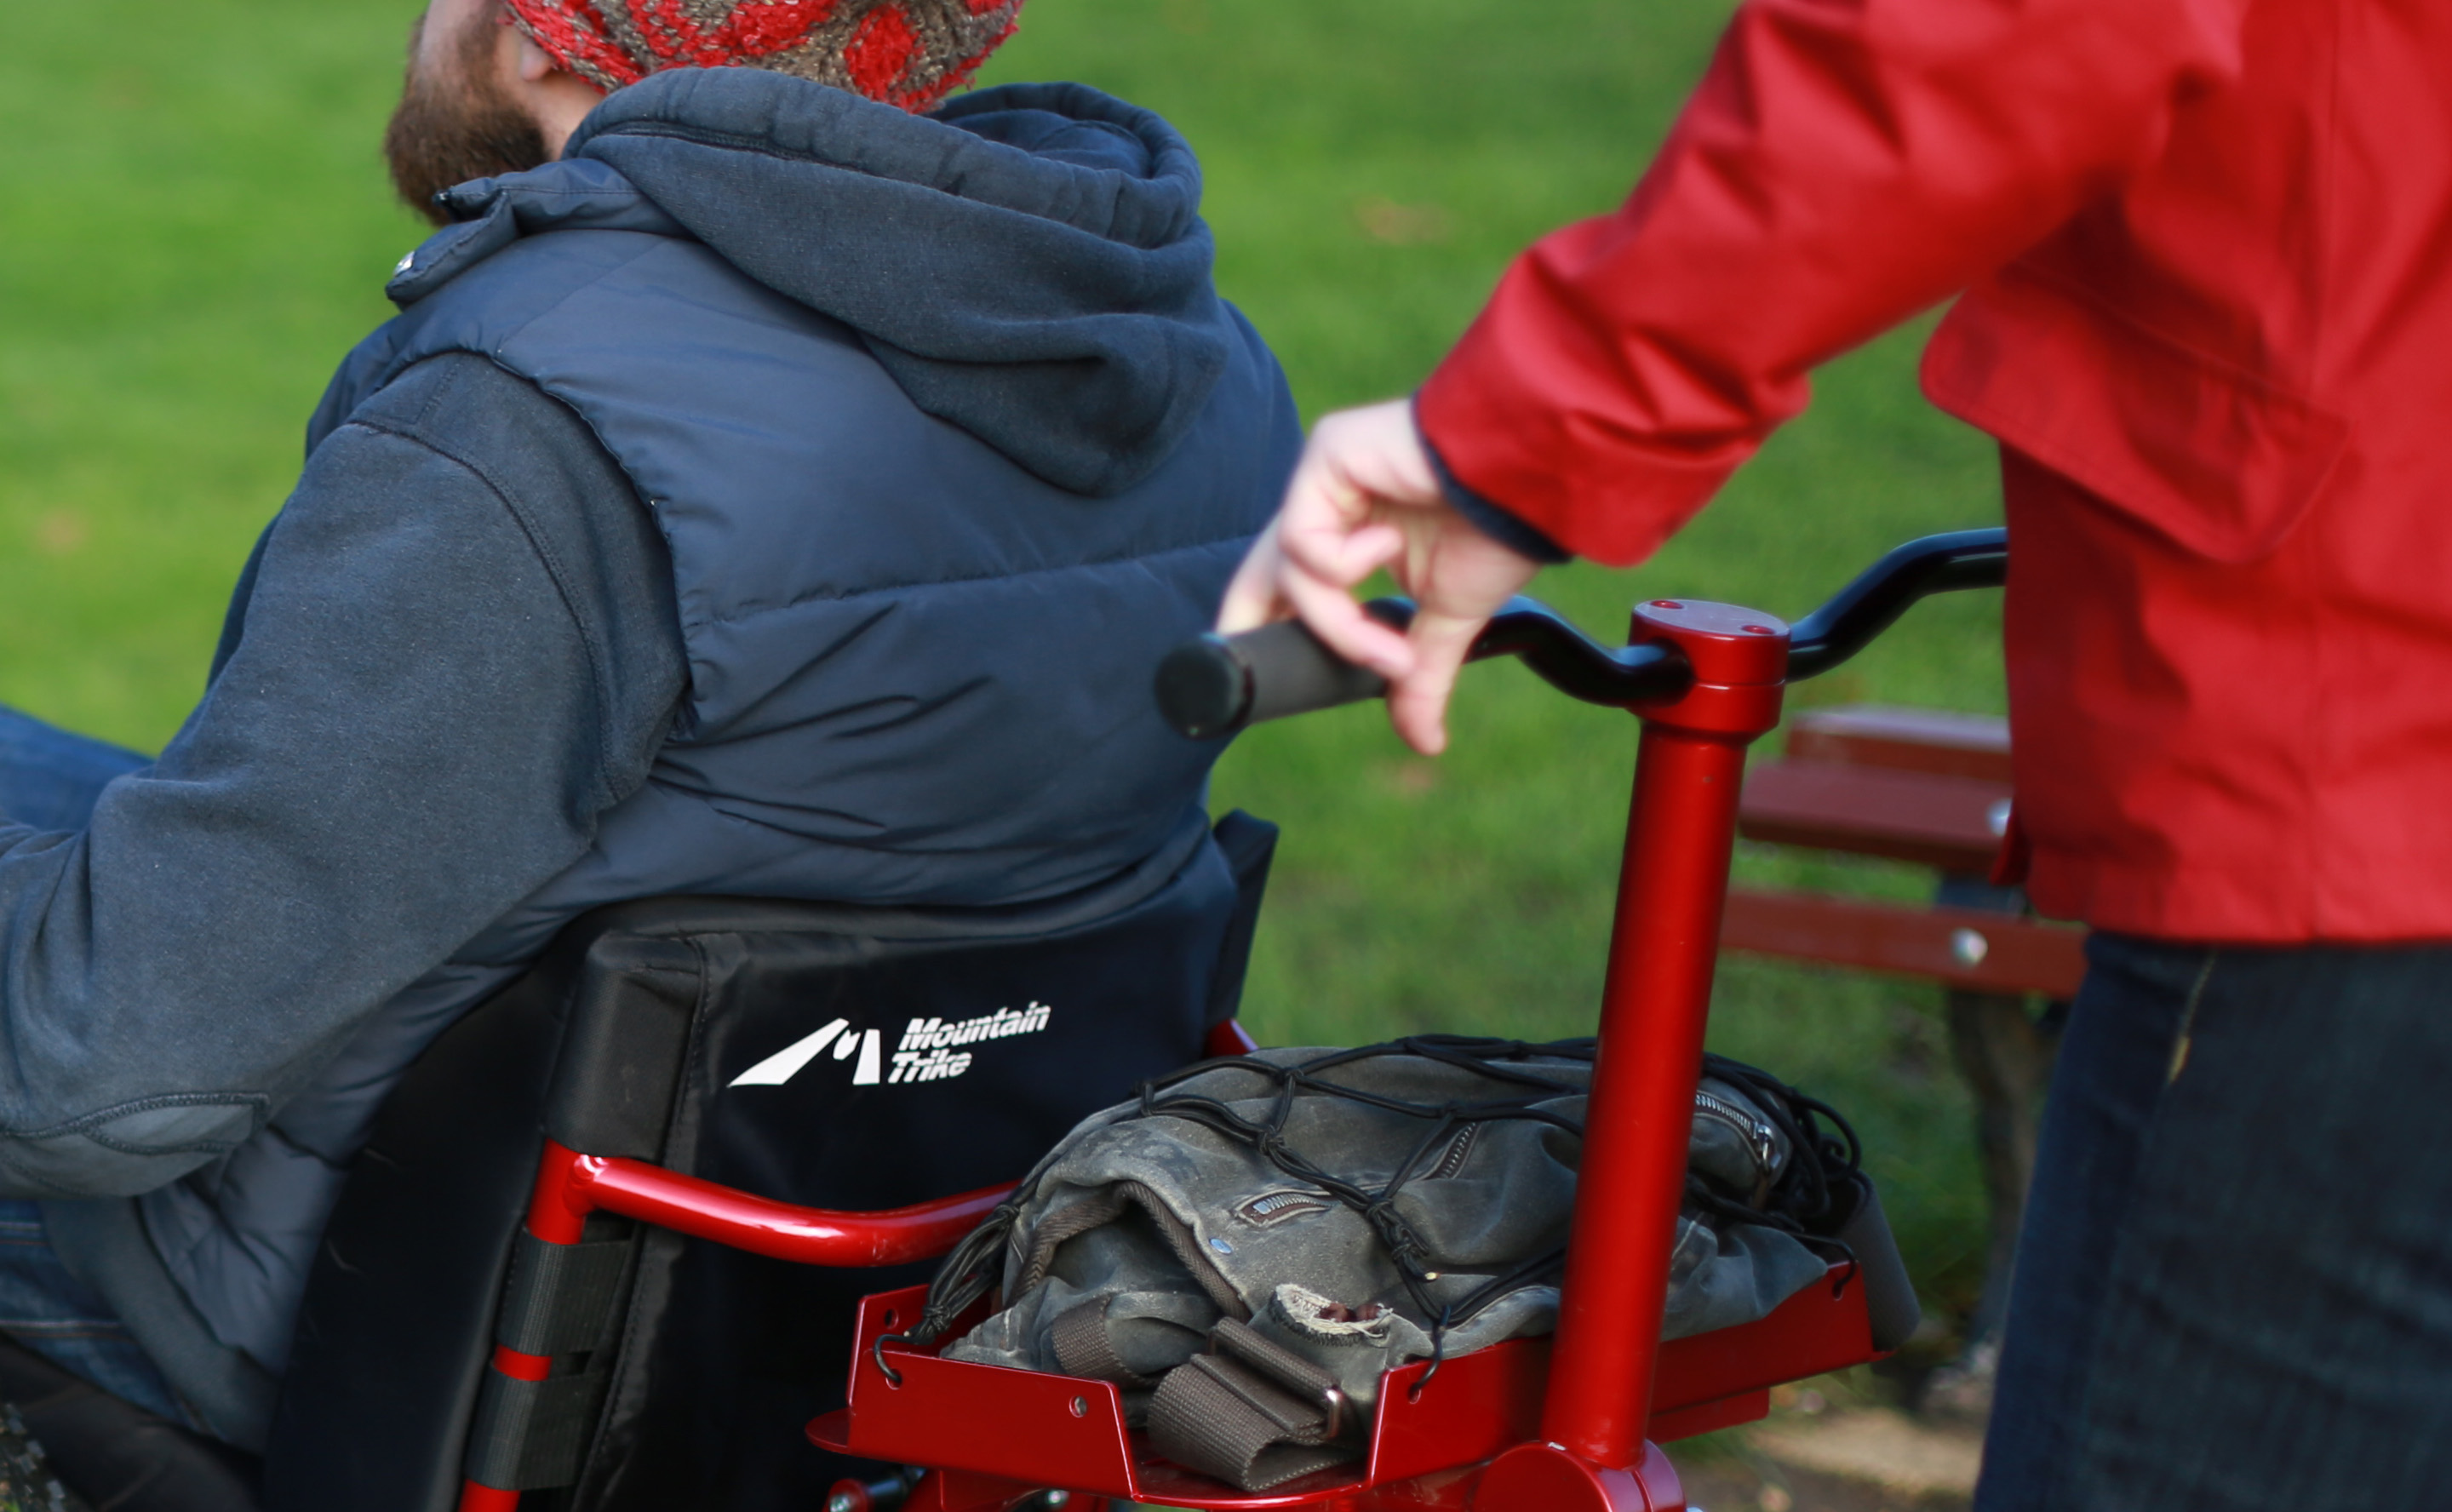 MT Push - the perfect off road buddy / attendant wheelchair from Mountain Trike